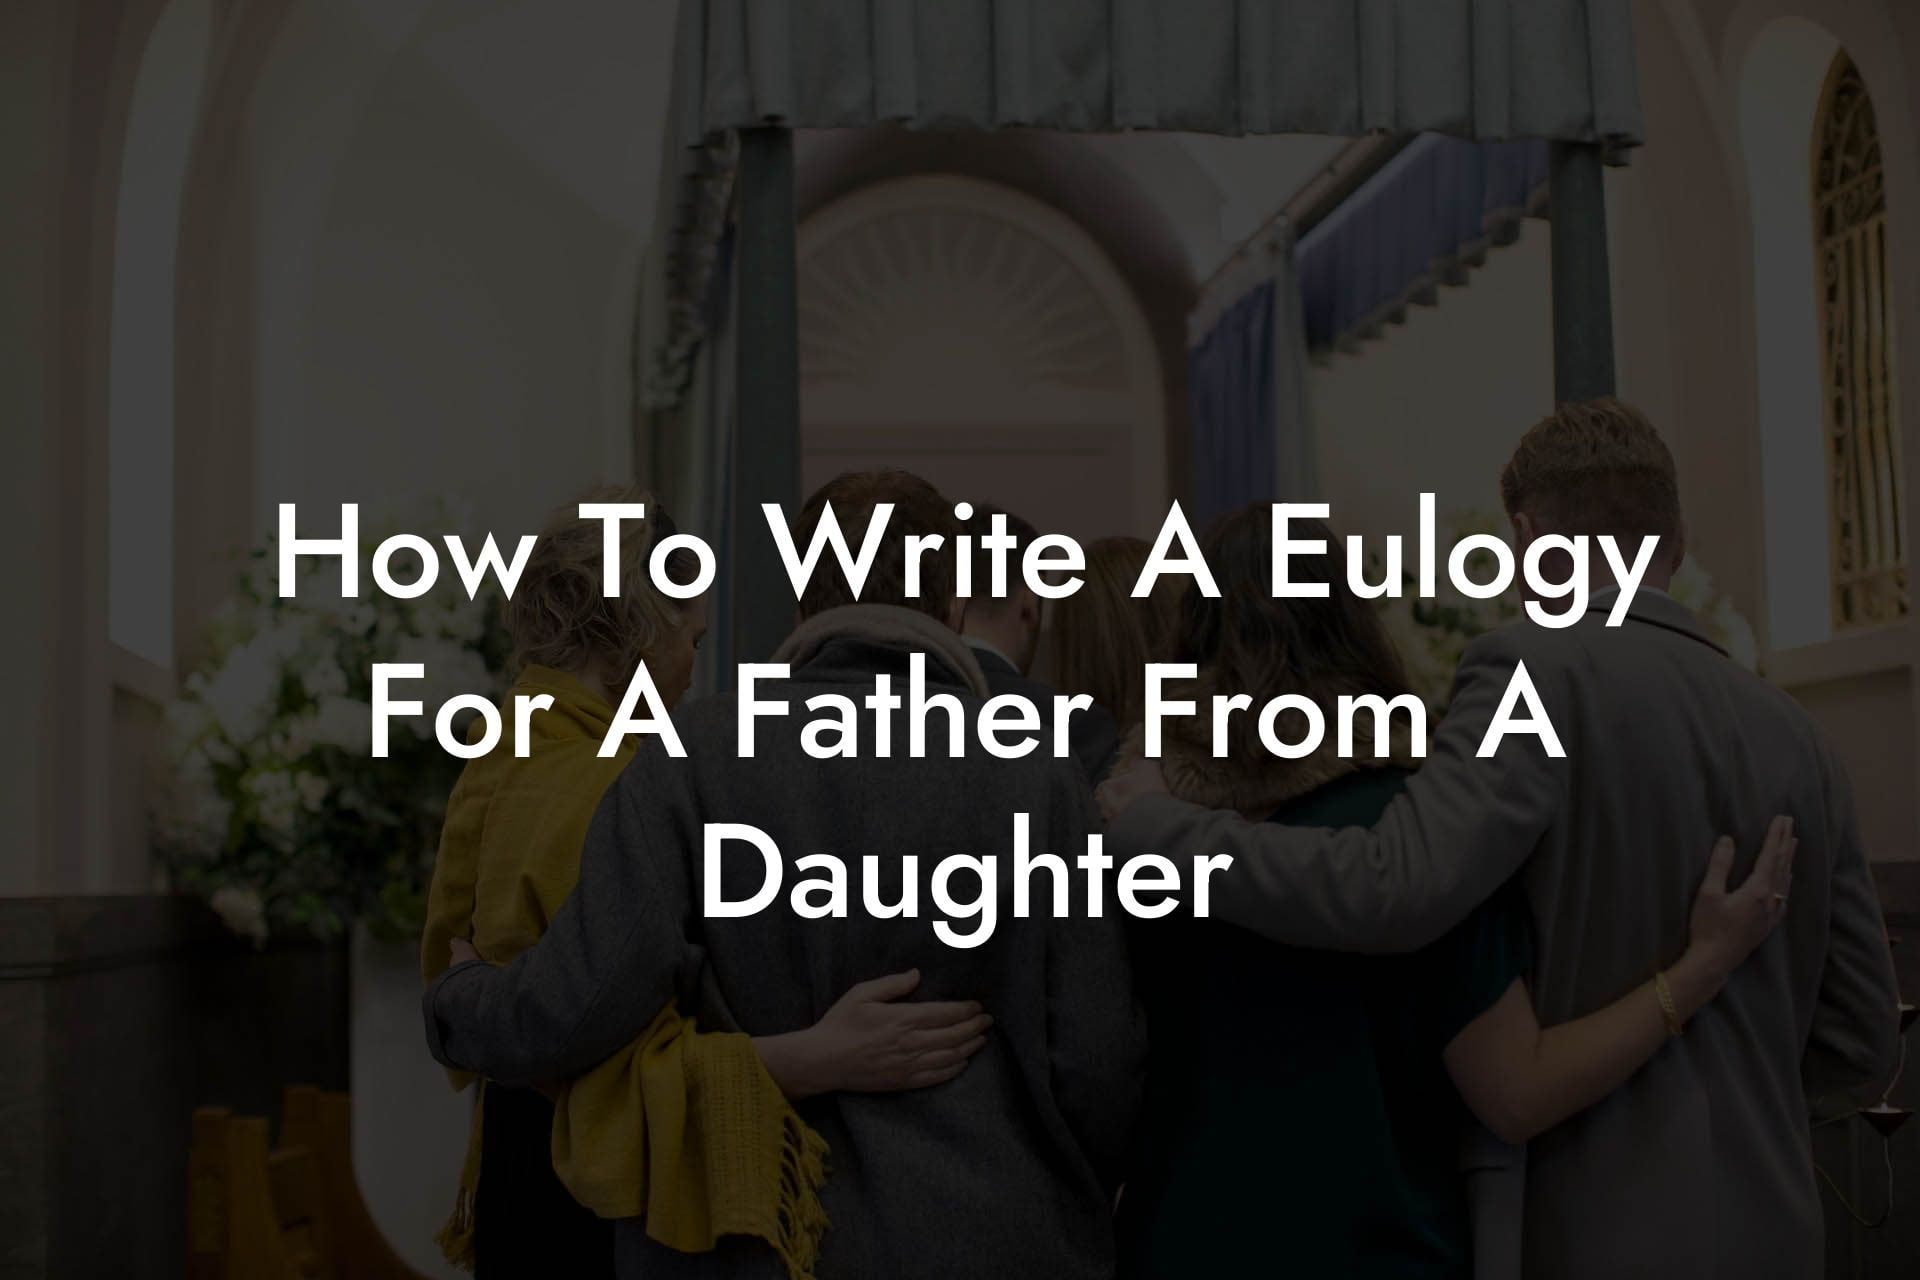 How To Write A Eulogy For A Father From A Daughter